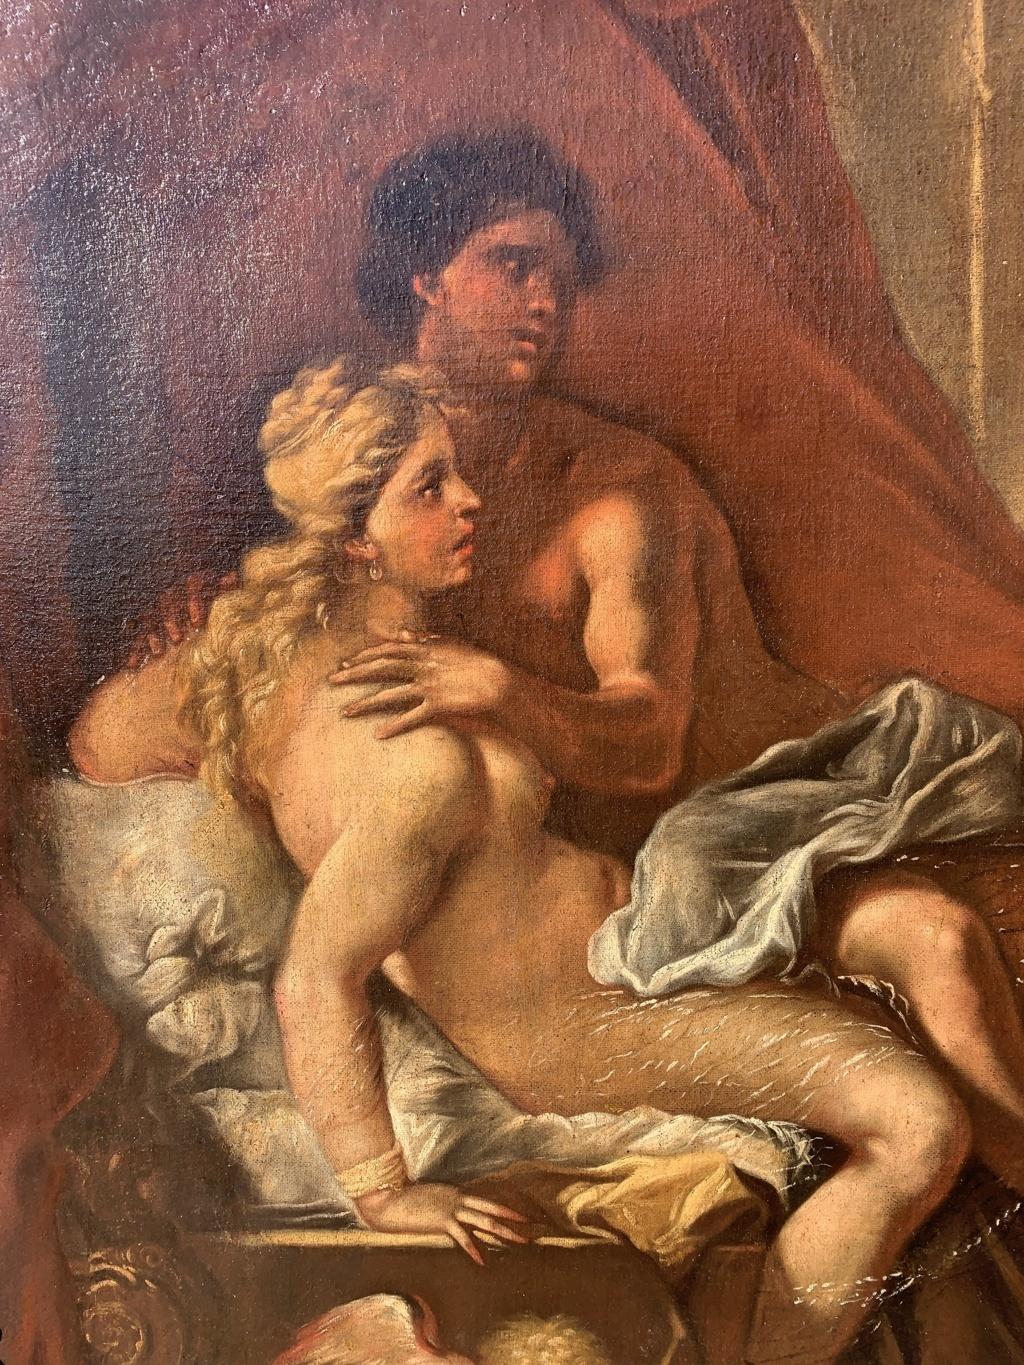 Italian master of the 17th century. - Aphrodite and Ares imprisoned by Hephaestus at the behest of Zeus.

125 x 152 cm without frame, 140 x 167 cm with frame.

Oil on canvas, in a carved, gilded and painted wooden frame. 
